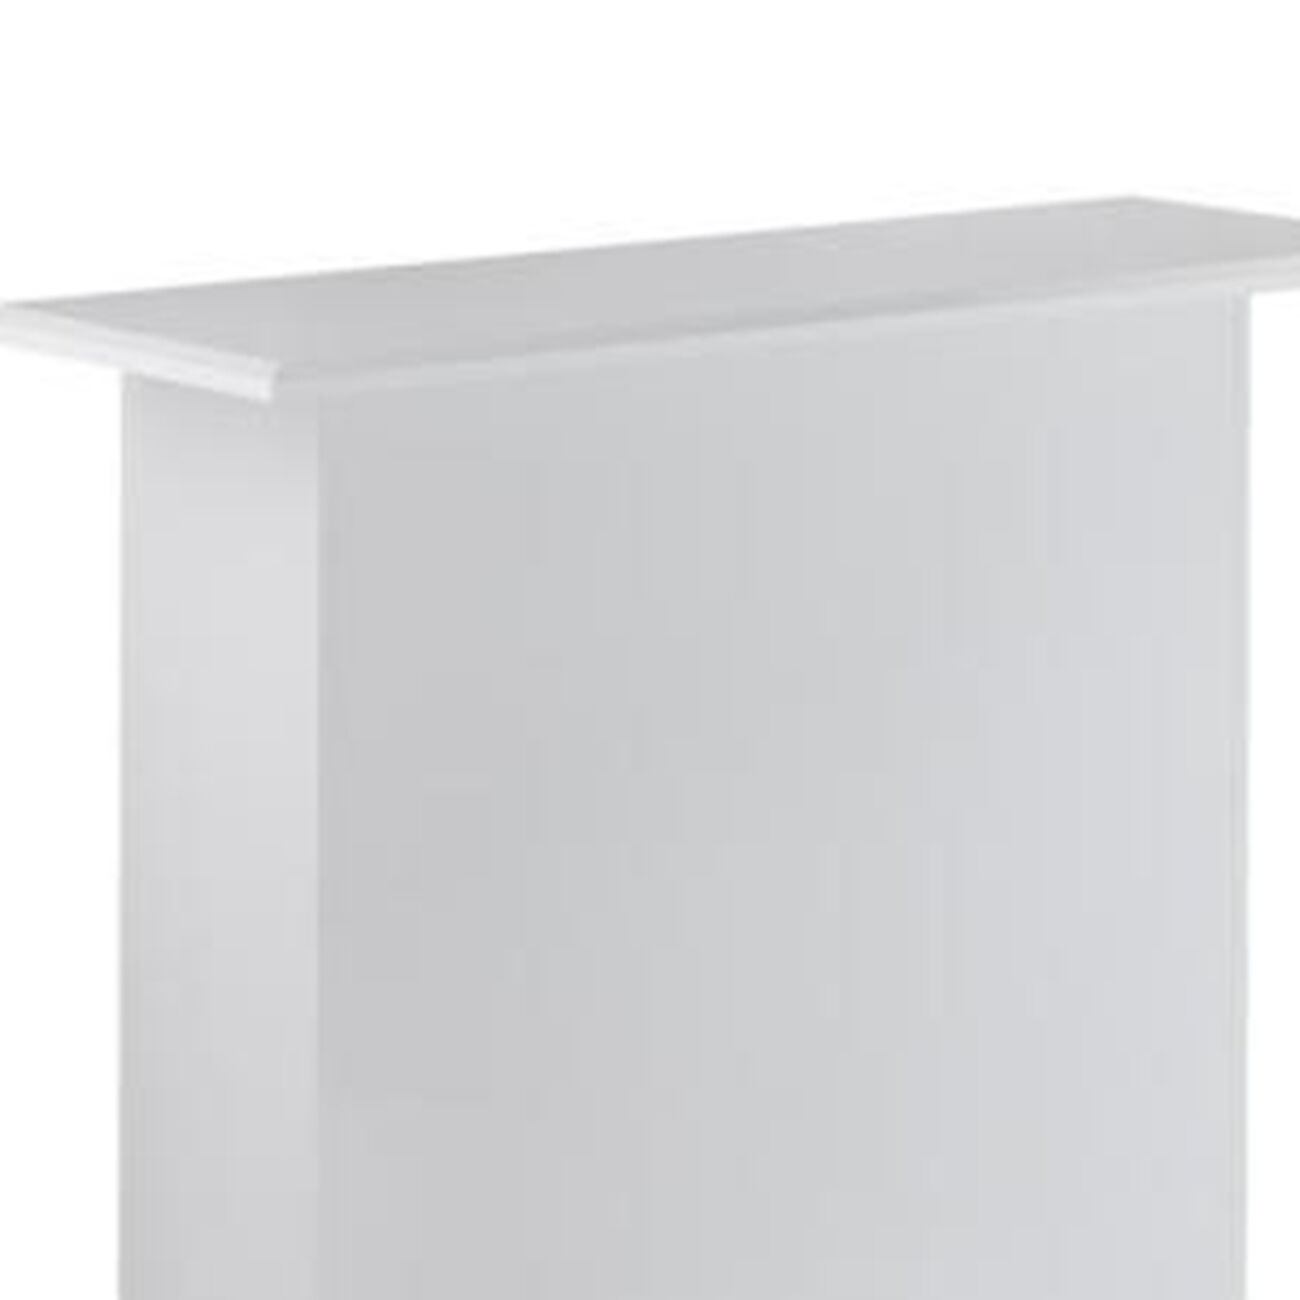 Rectangular Wooden Bar Table with Storage, White and Chrome